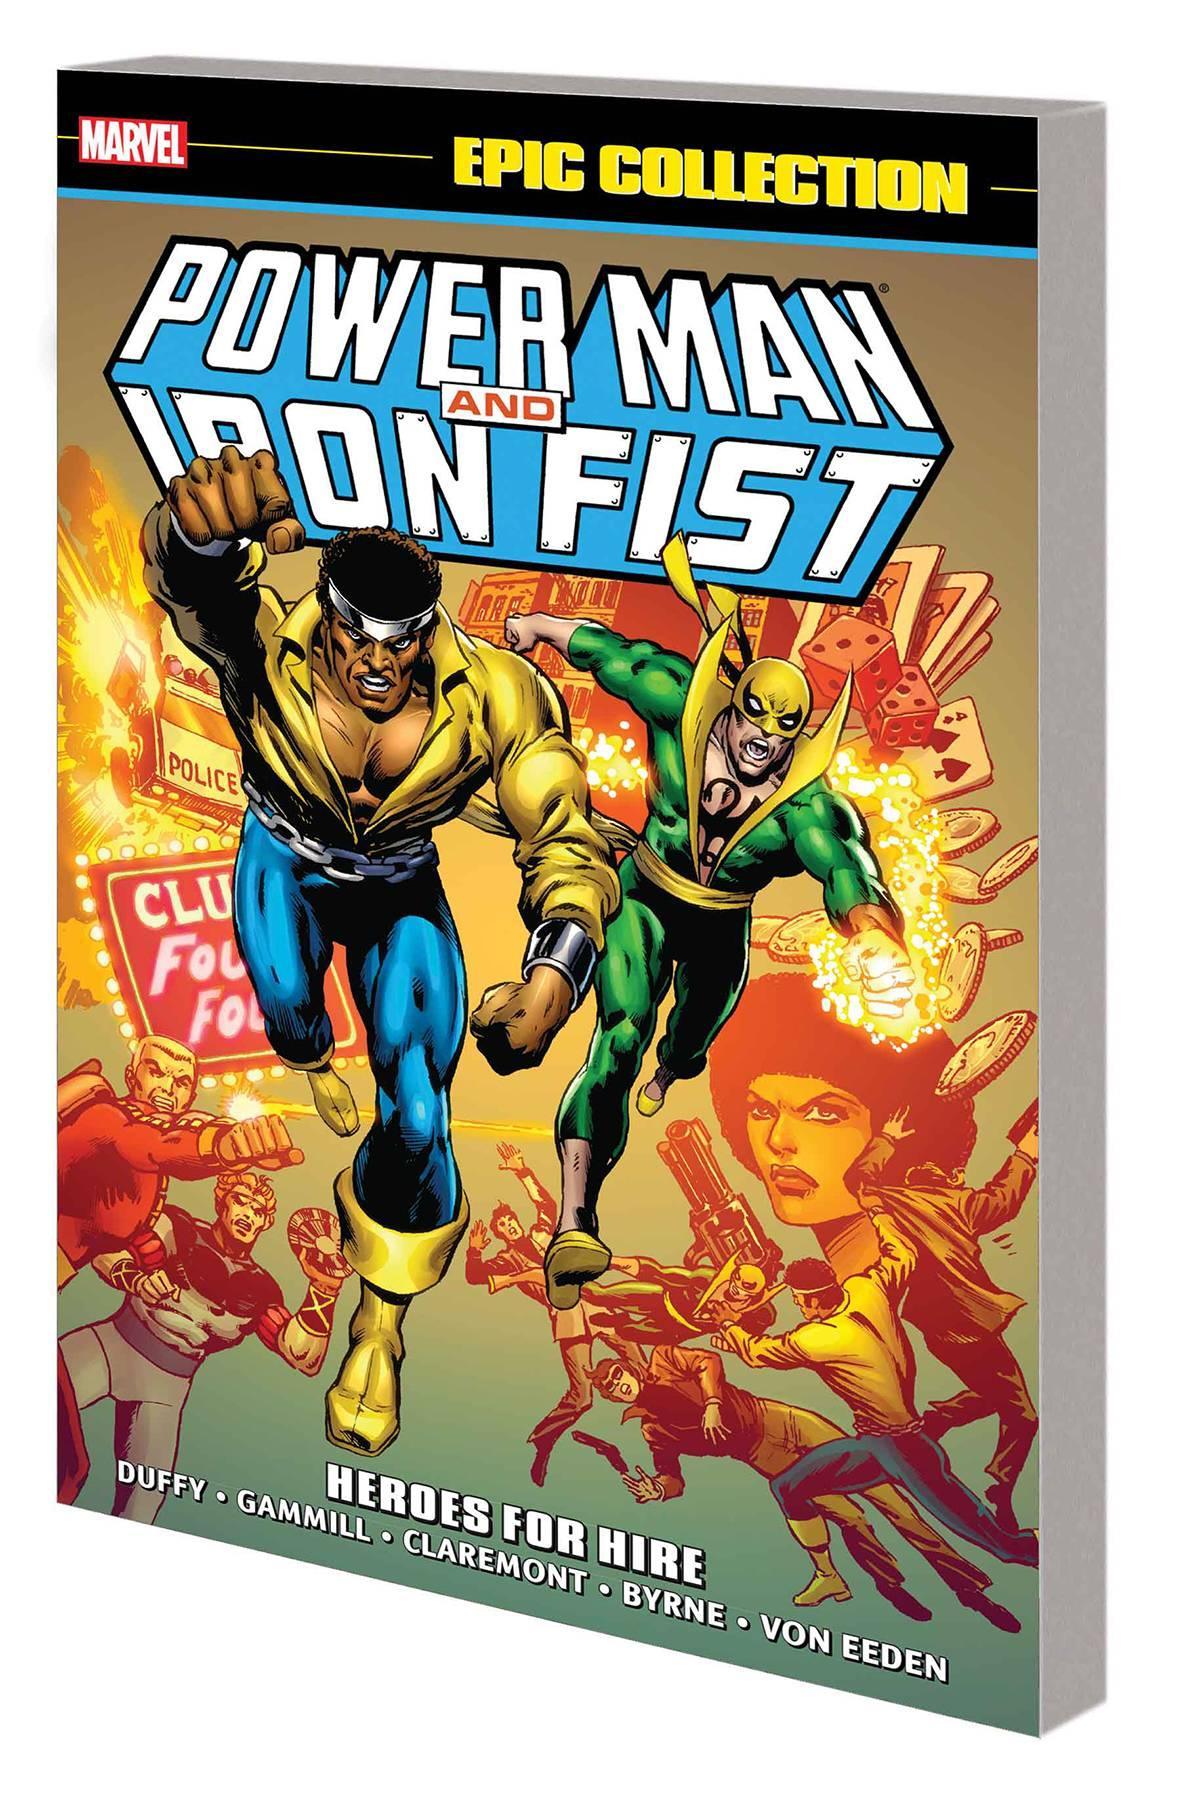 POWER MAN AND IRON FIST EPIC COLLECTION VOL 01 TP HEROES FOR HIRE NEW PTG - Kings Comics